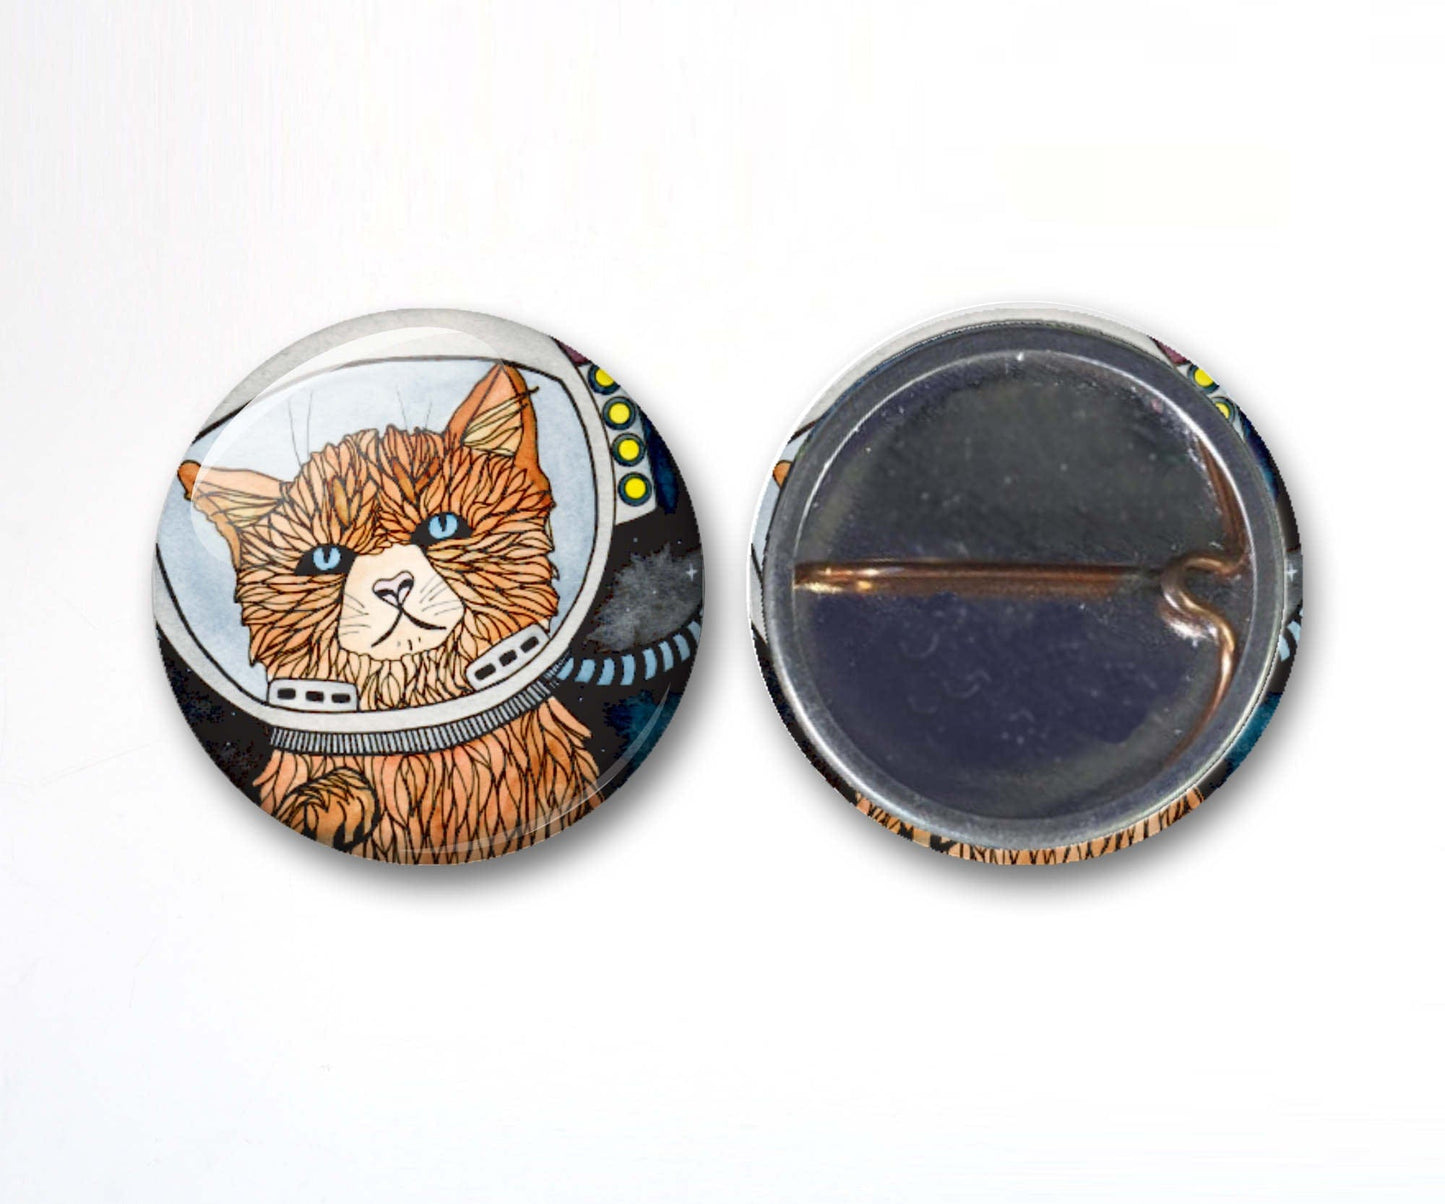 PinkPolish Design Buttons "Curious Cat" Button Pack - 3-Pack Pin Back Button, 1 Inch